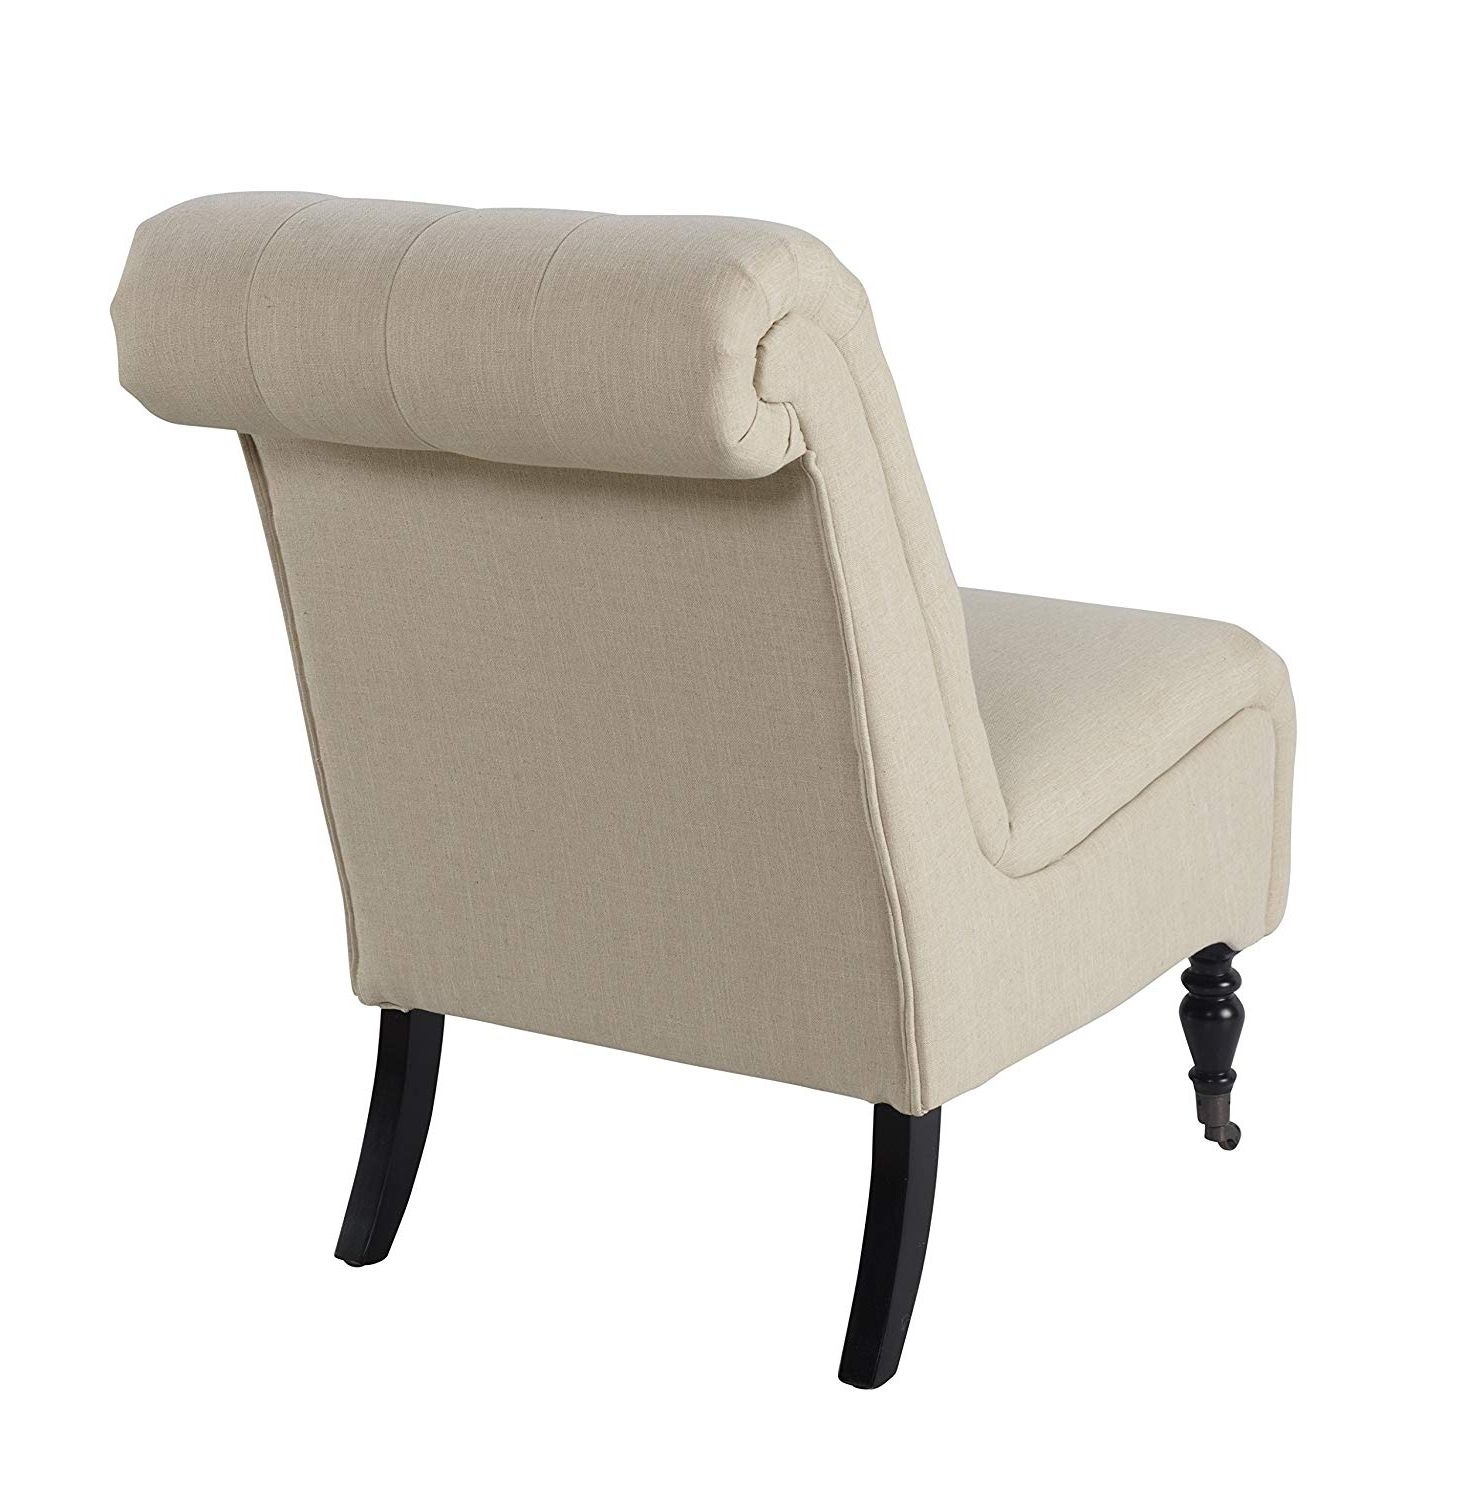 Amazon: Linon Cora Natural Roll Back Tufted Chair: Kitchen & Dining Throughout Popular Cora Side Chairs (View 15 of 20)